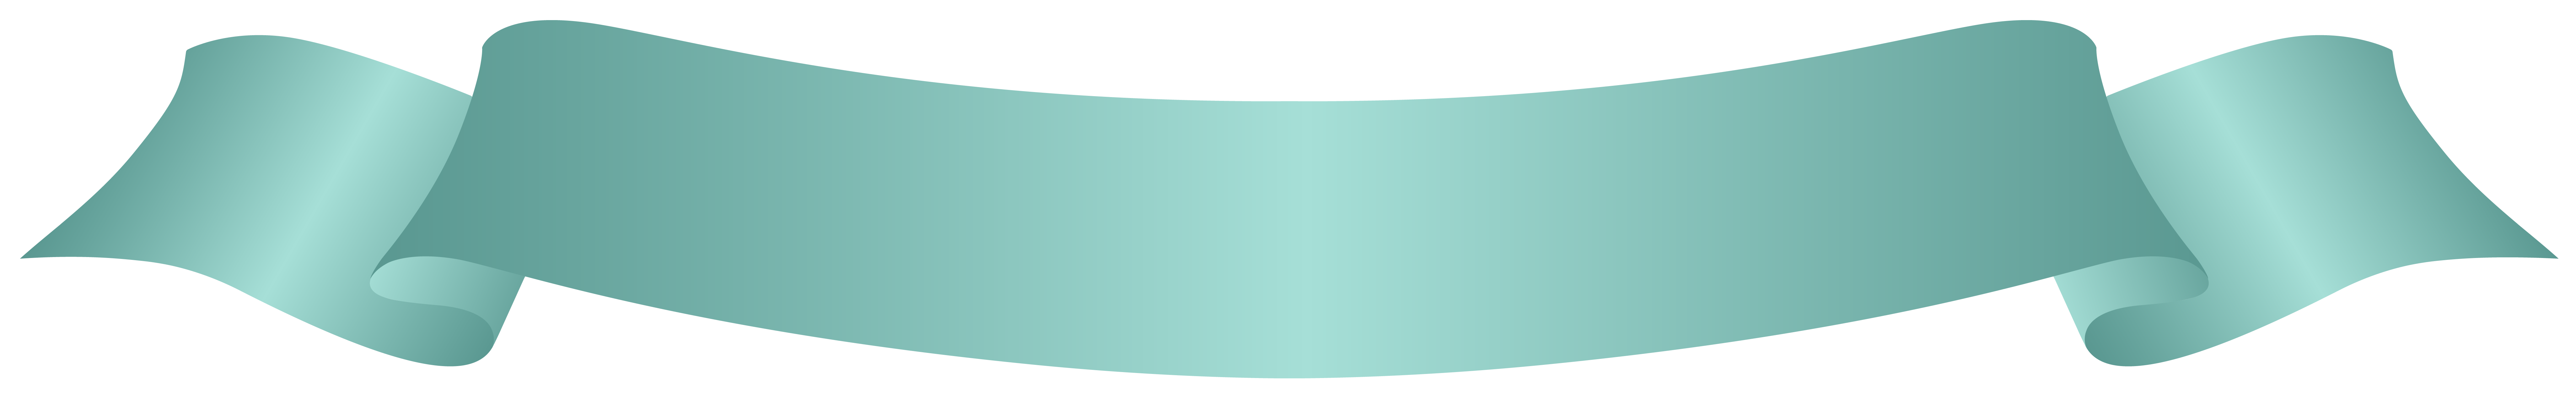 Turquoise Banner Download Transparent PNG Image